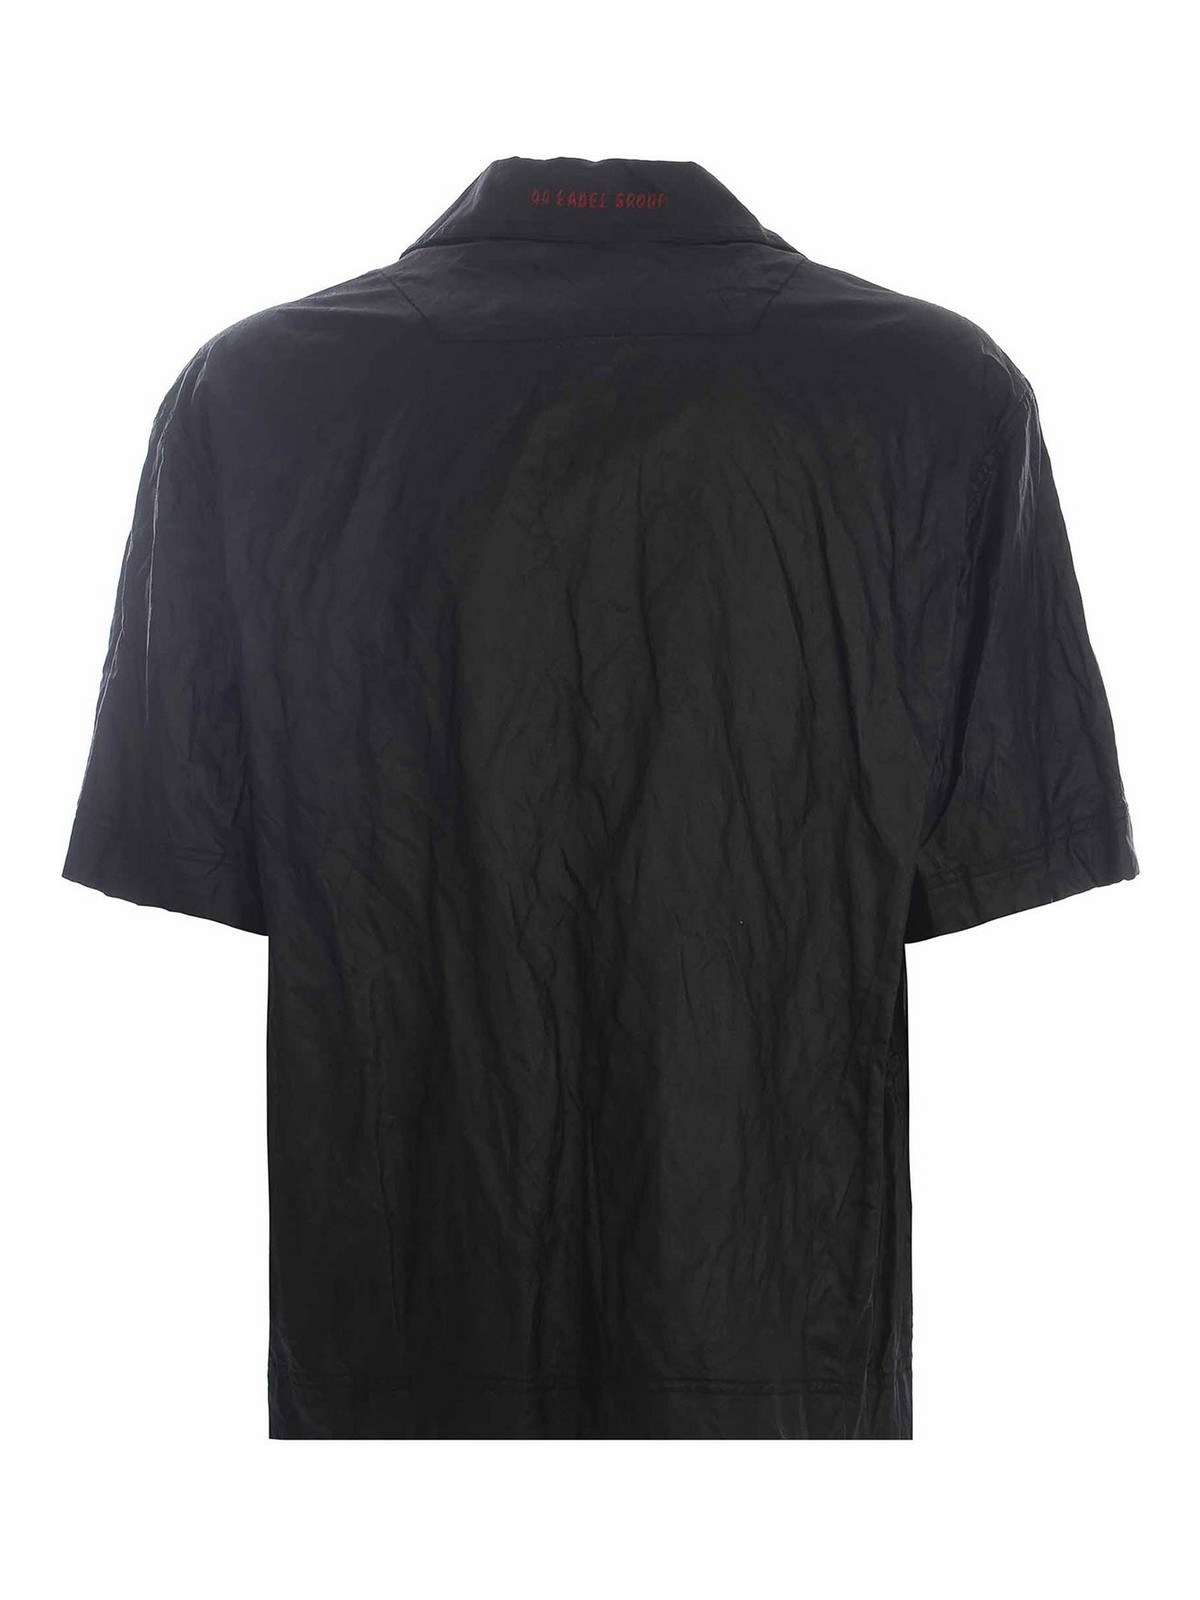 Shop 44 Label Group Bowling Shirt In Black